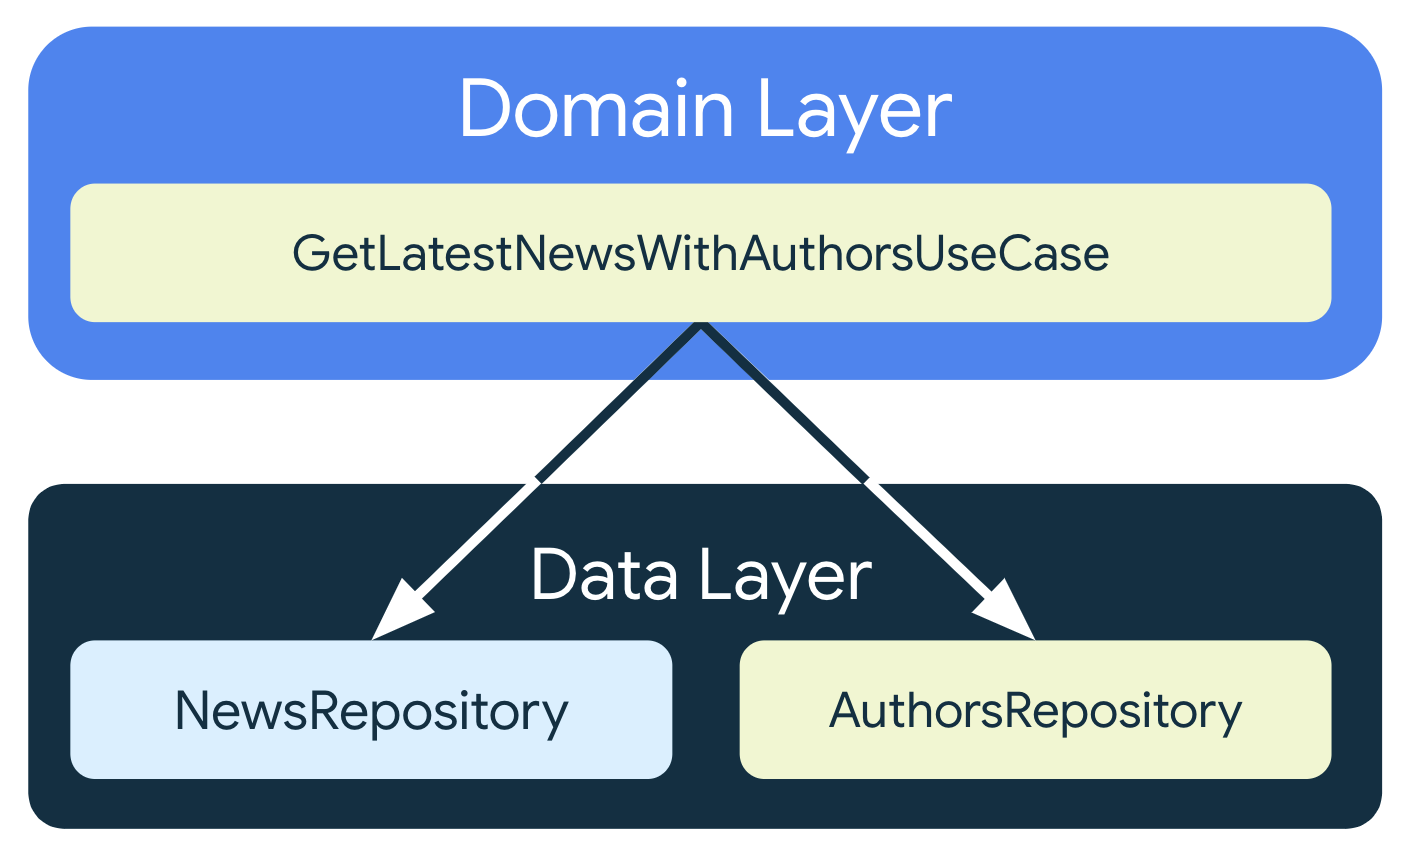 GetLatestNewsWithAuthorsUseCase depends on two different repository
    classes from the data layer: NewsRepository and AuthorsRepository.